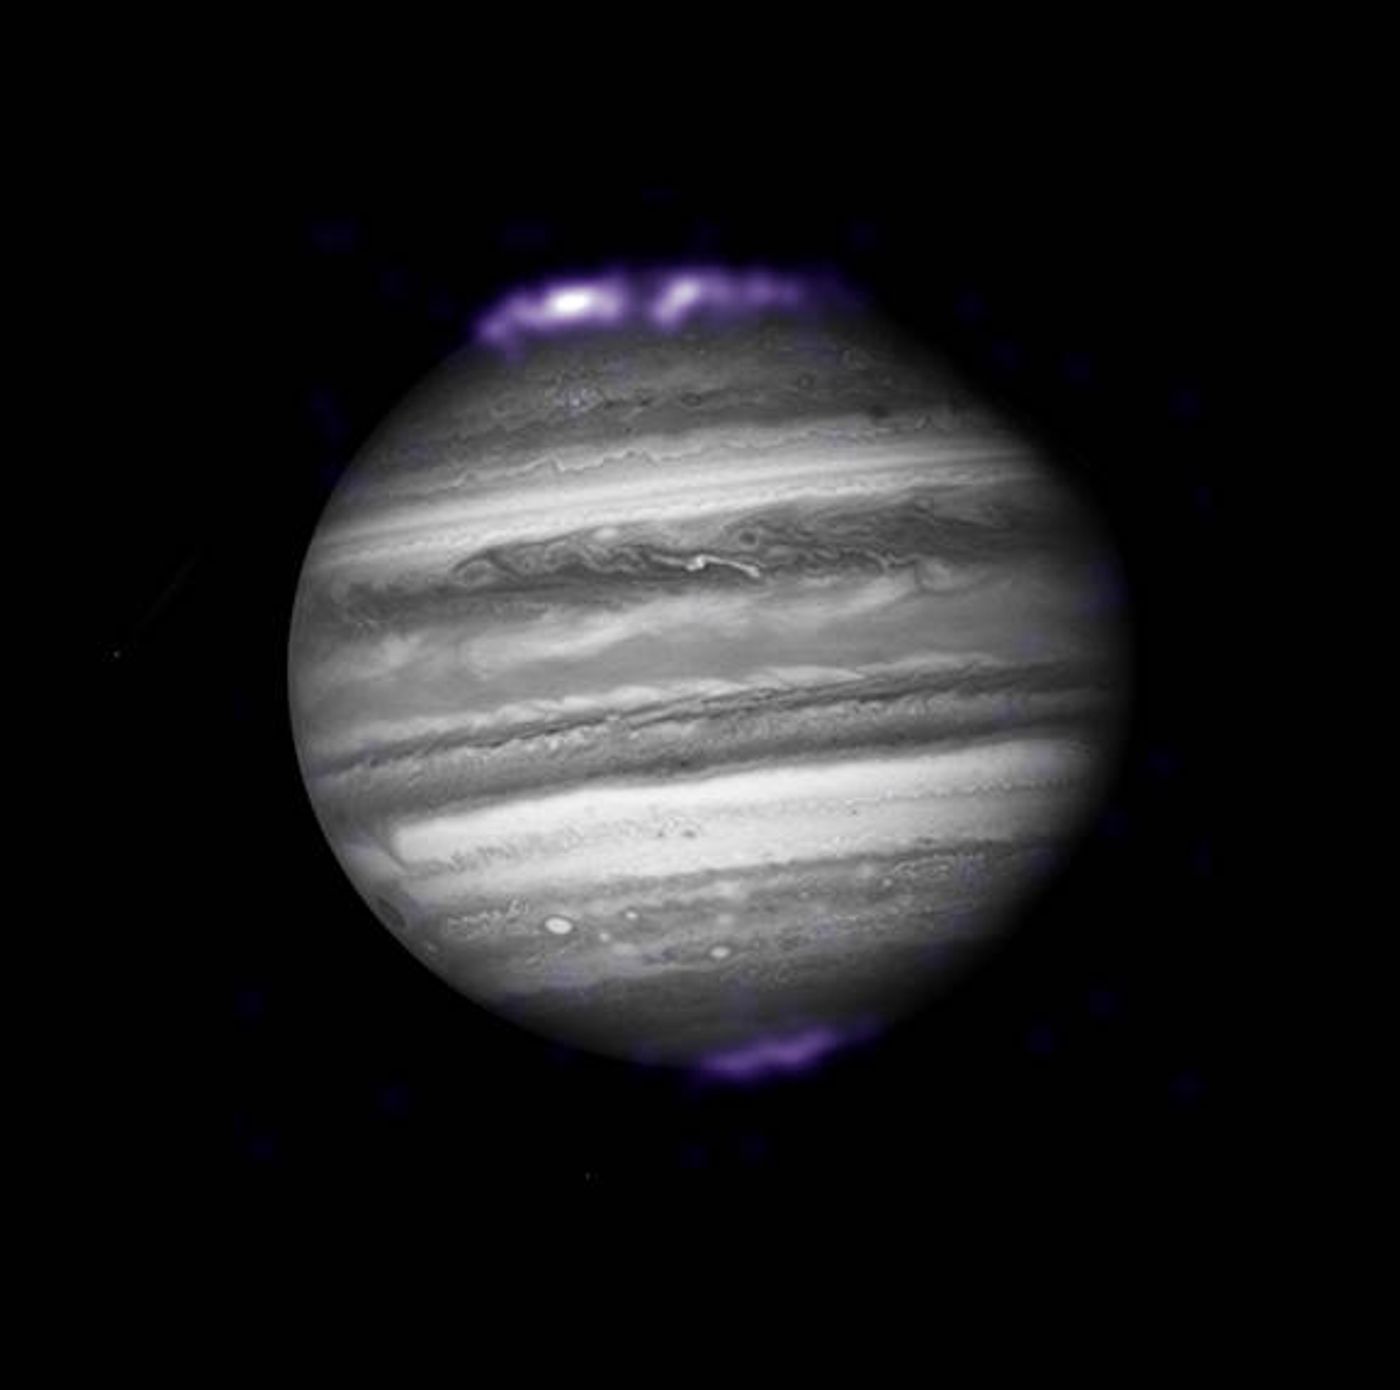 This infrared image taken of Jupiter in 2007 shows its aurora glowing intensely.